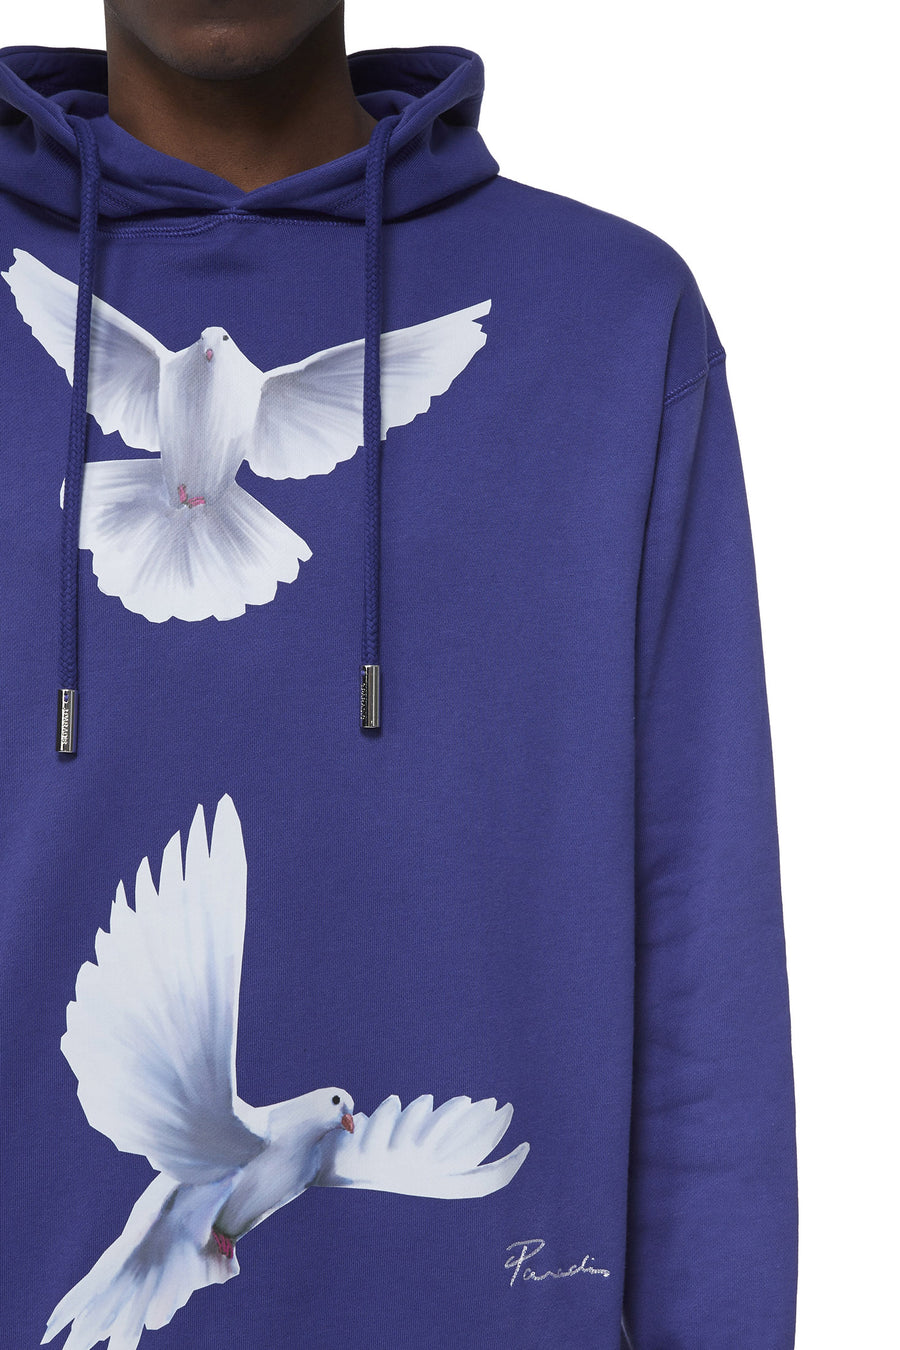 FREEDOM DOVES PERSIAN BLUE HOODED SWEATER